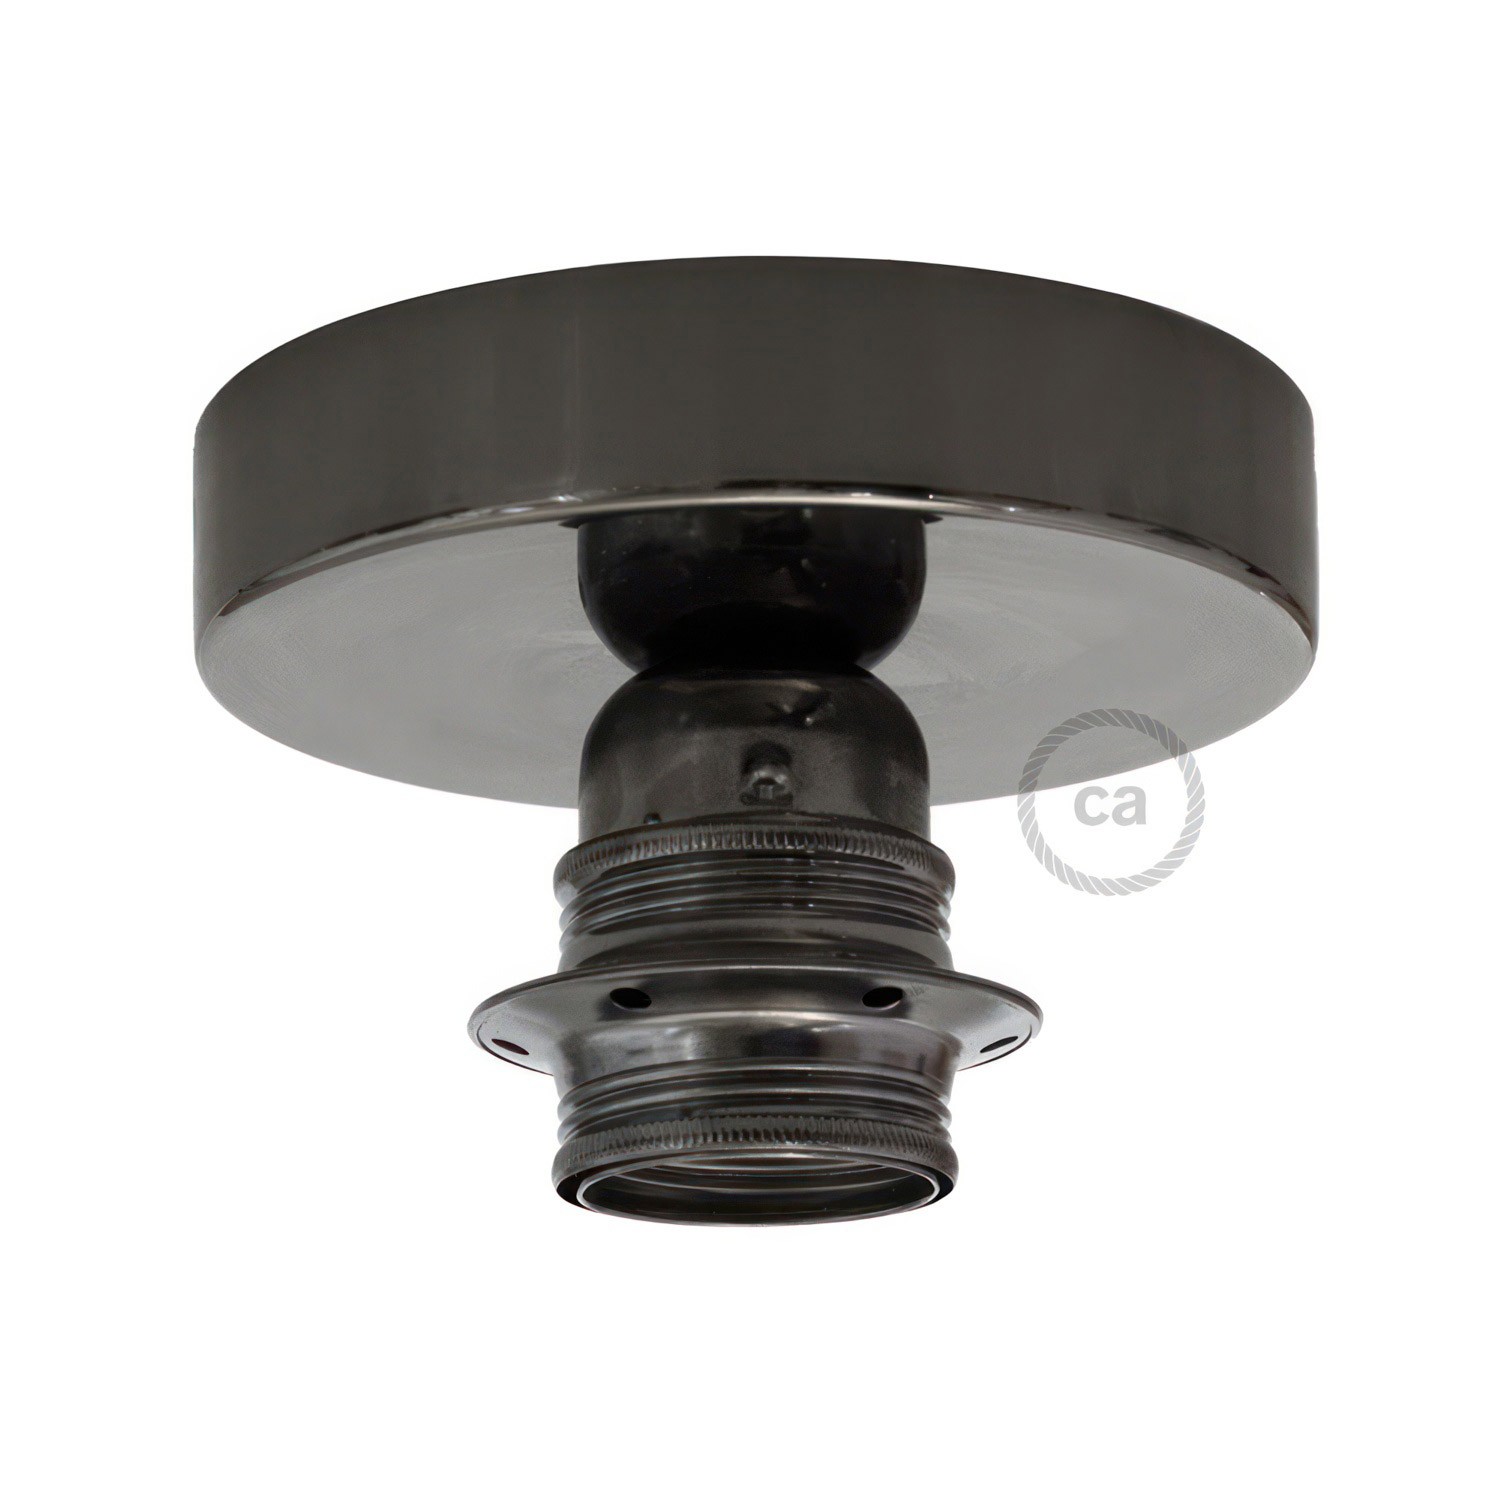 Fermaluce Metal with E27 threaded lamp holder, the metal wall or ceiling light source